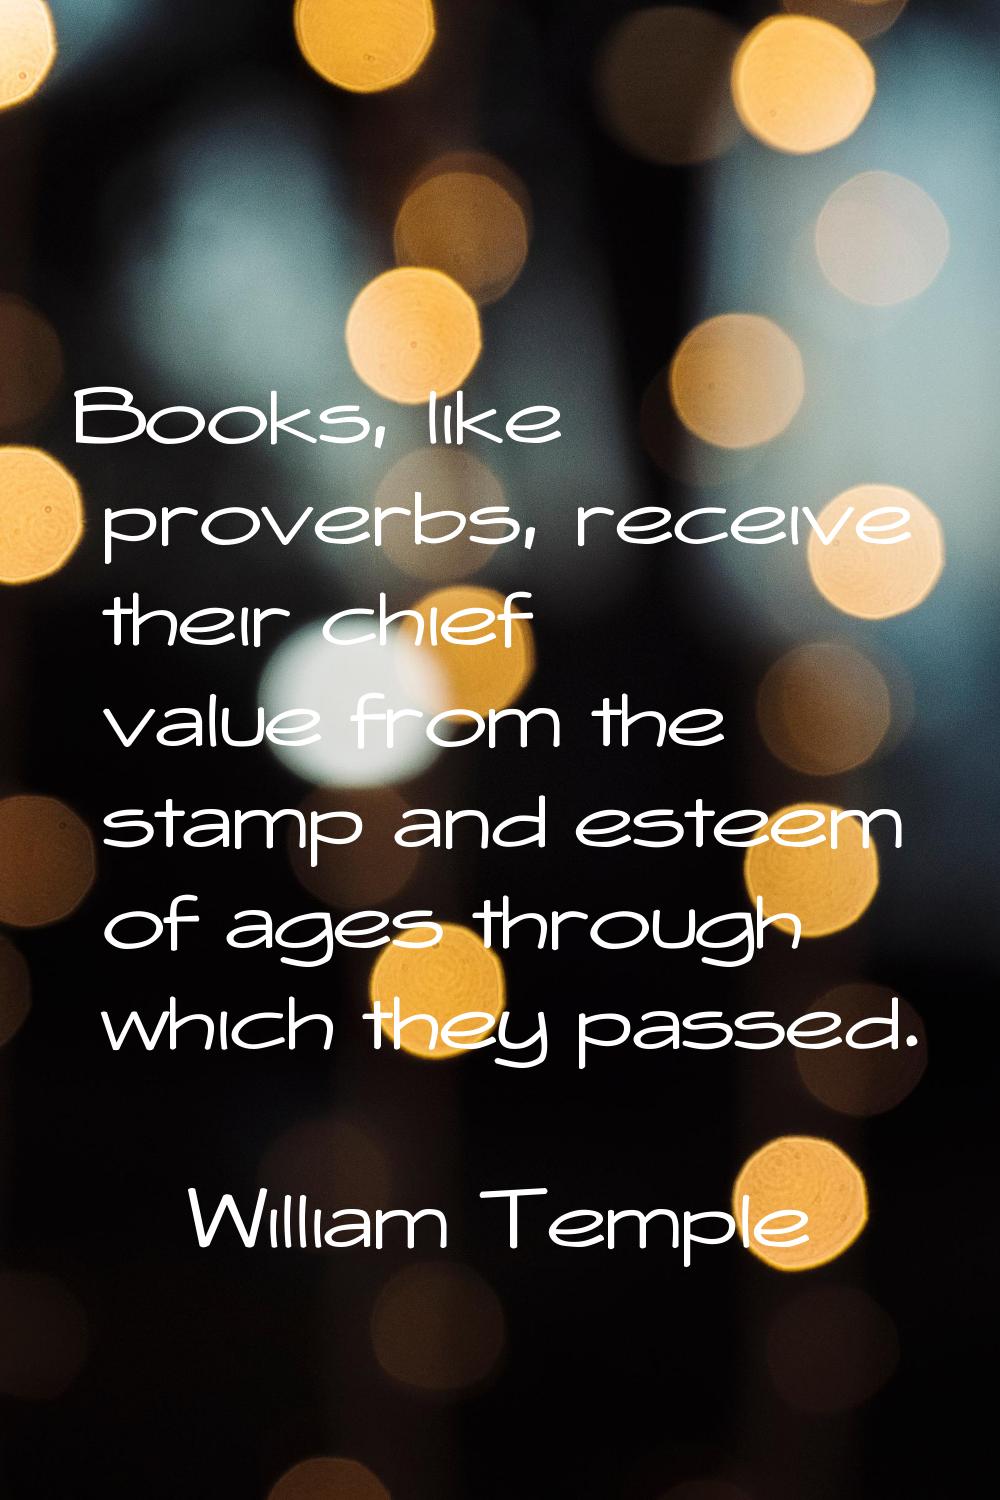 Books, like proverbs, receive their chief value from the stamp and esteem of ages through which the